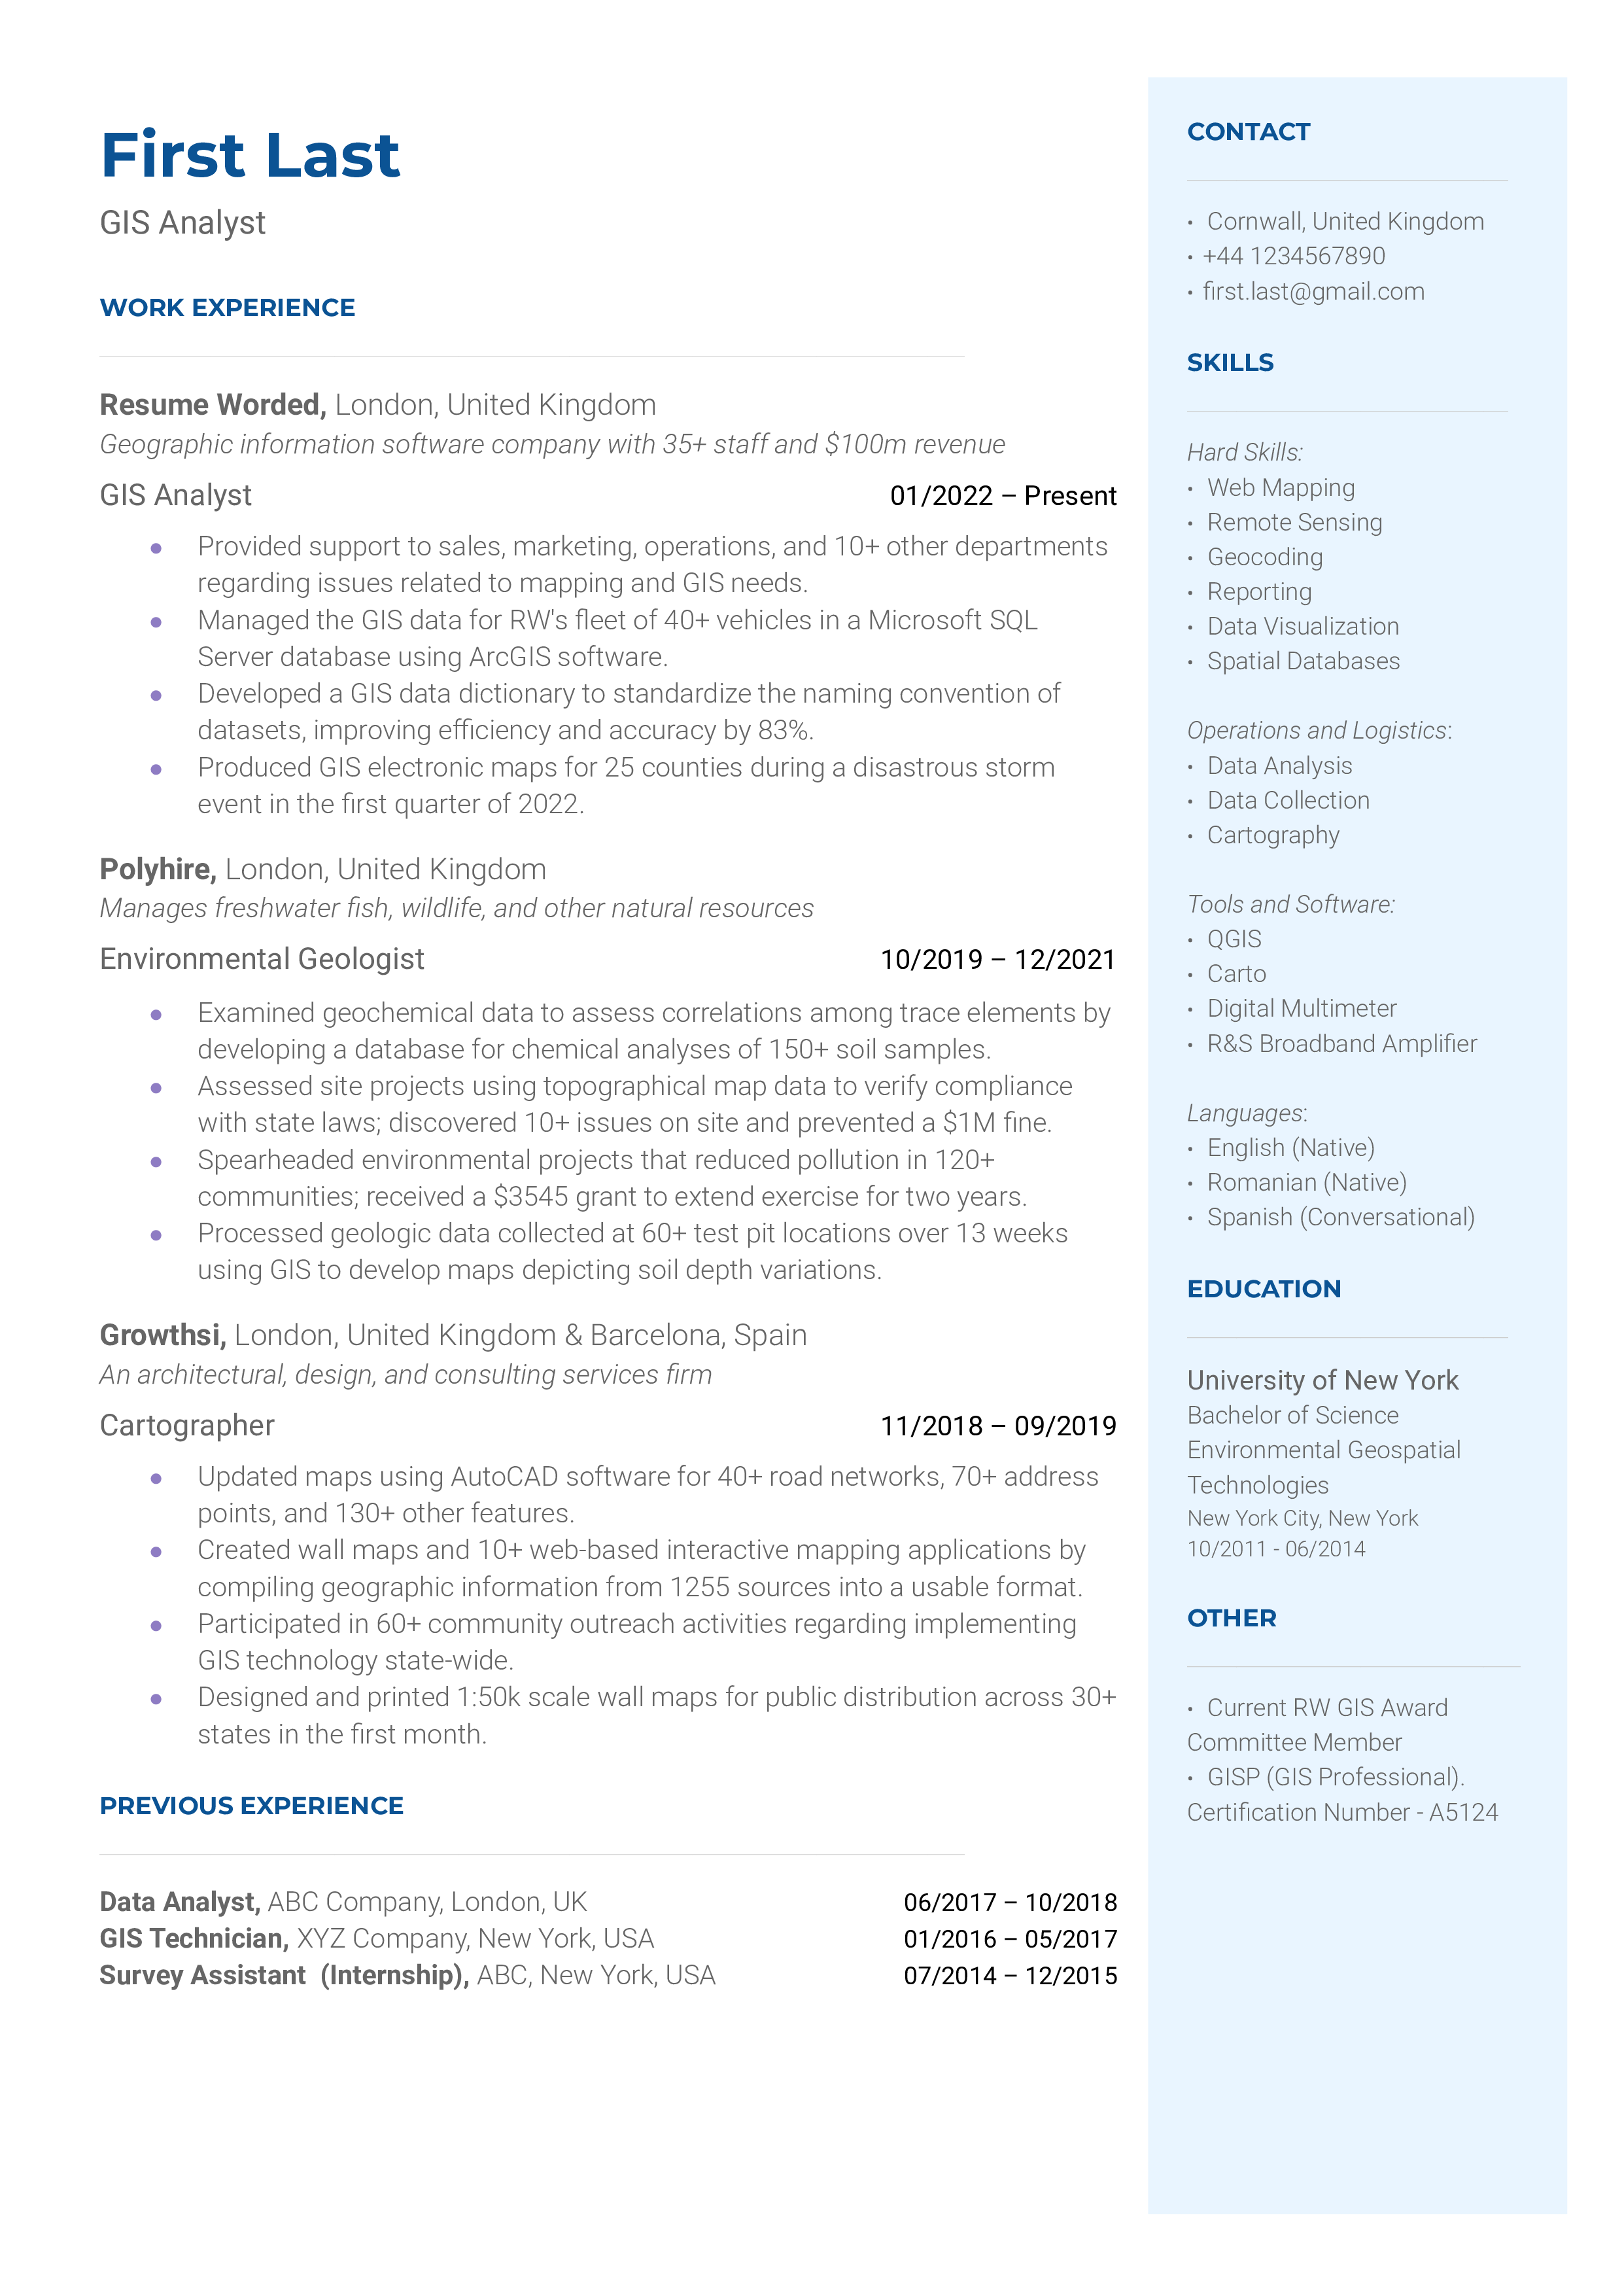 A CV for a GIS analyst showcasing AI proficiency and adaptability to new technologies.